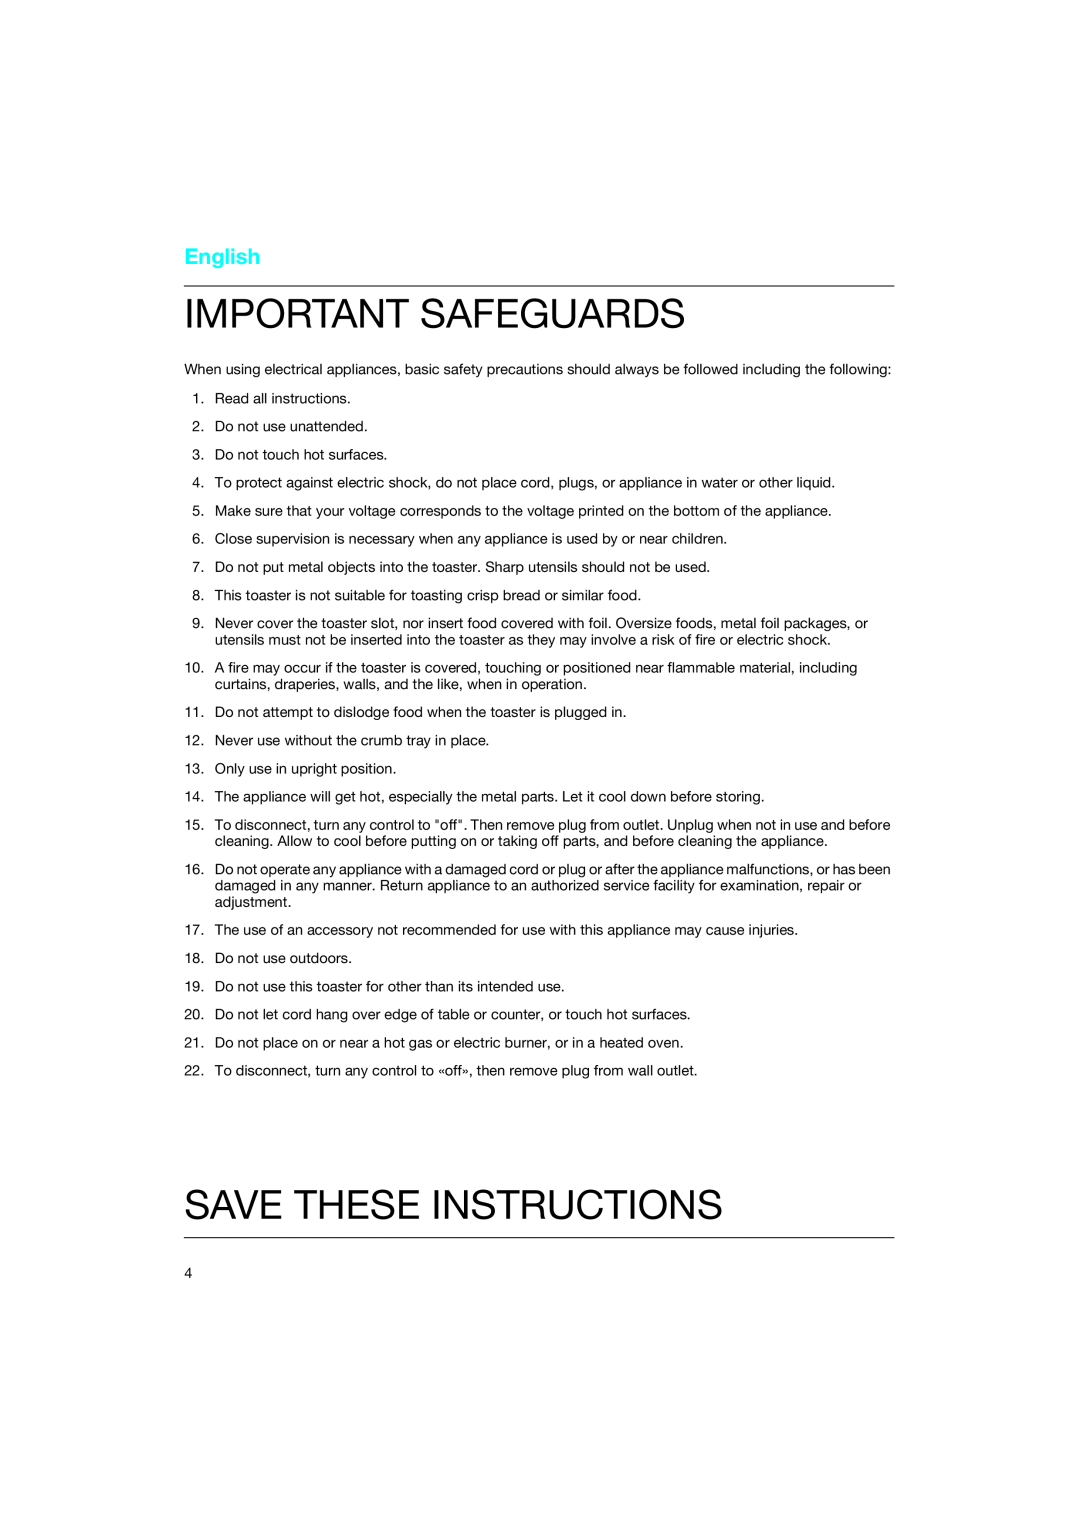 Braun 4118 manual Important Safeguards, Save These Instructions, English 